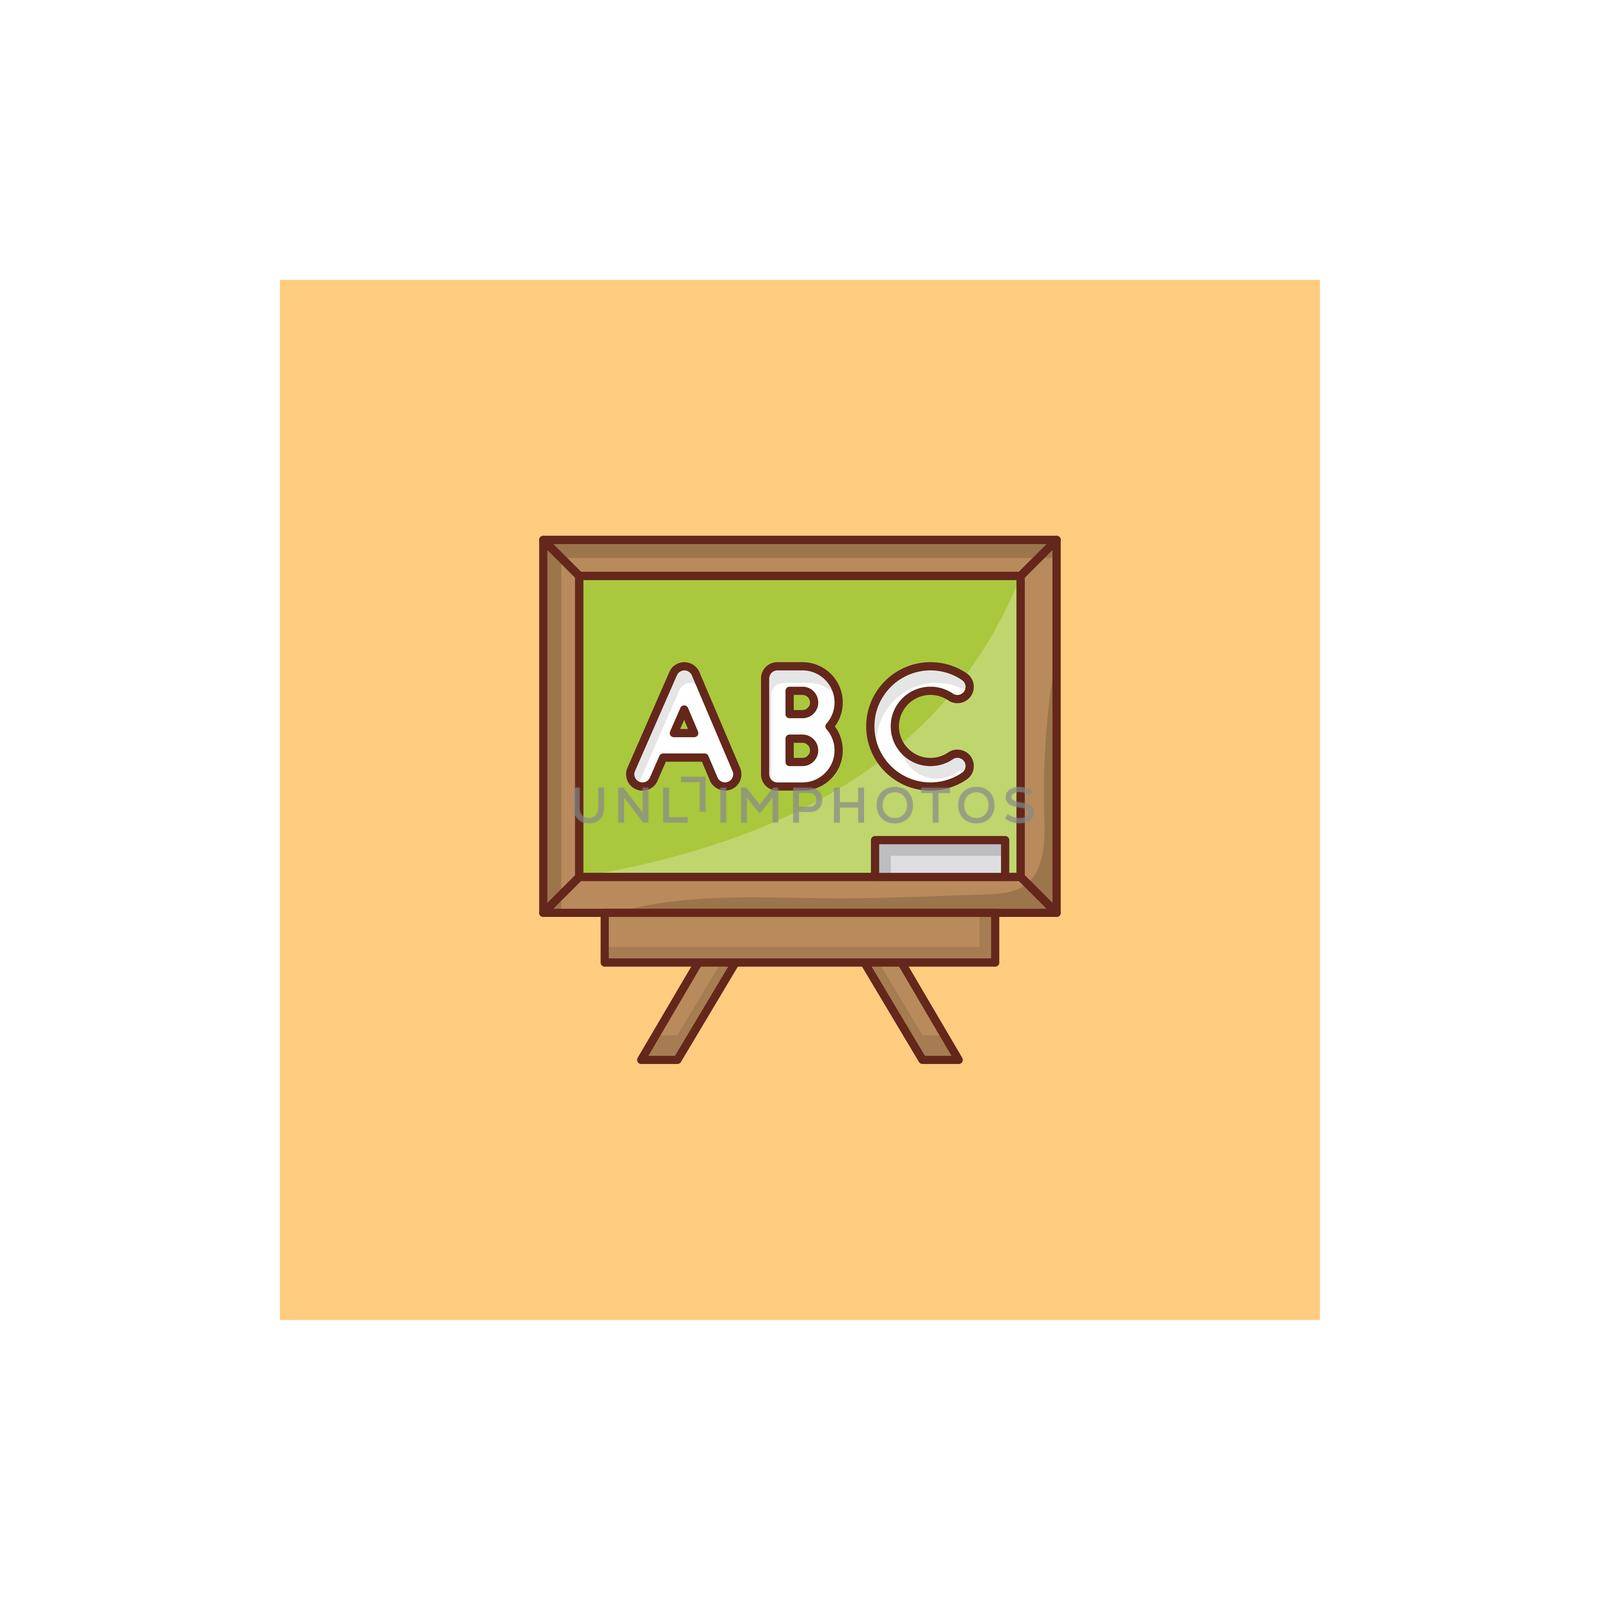 ABC Vector illustration on a transparent background. Premium quality symbols. Vector Line Flat color icon for concept and graphic design.